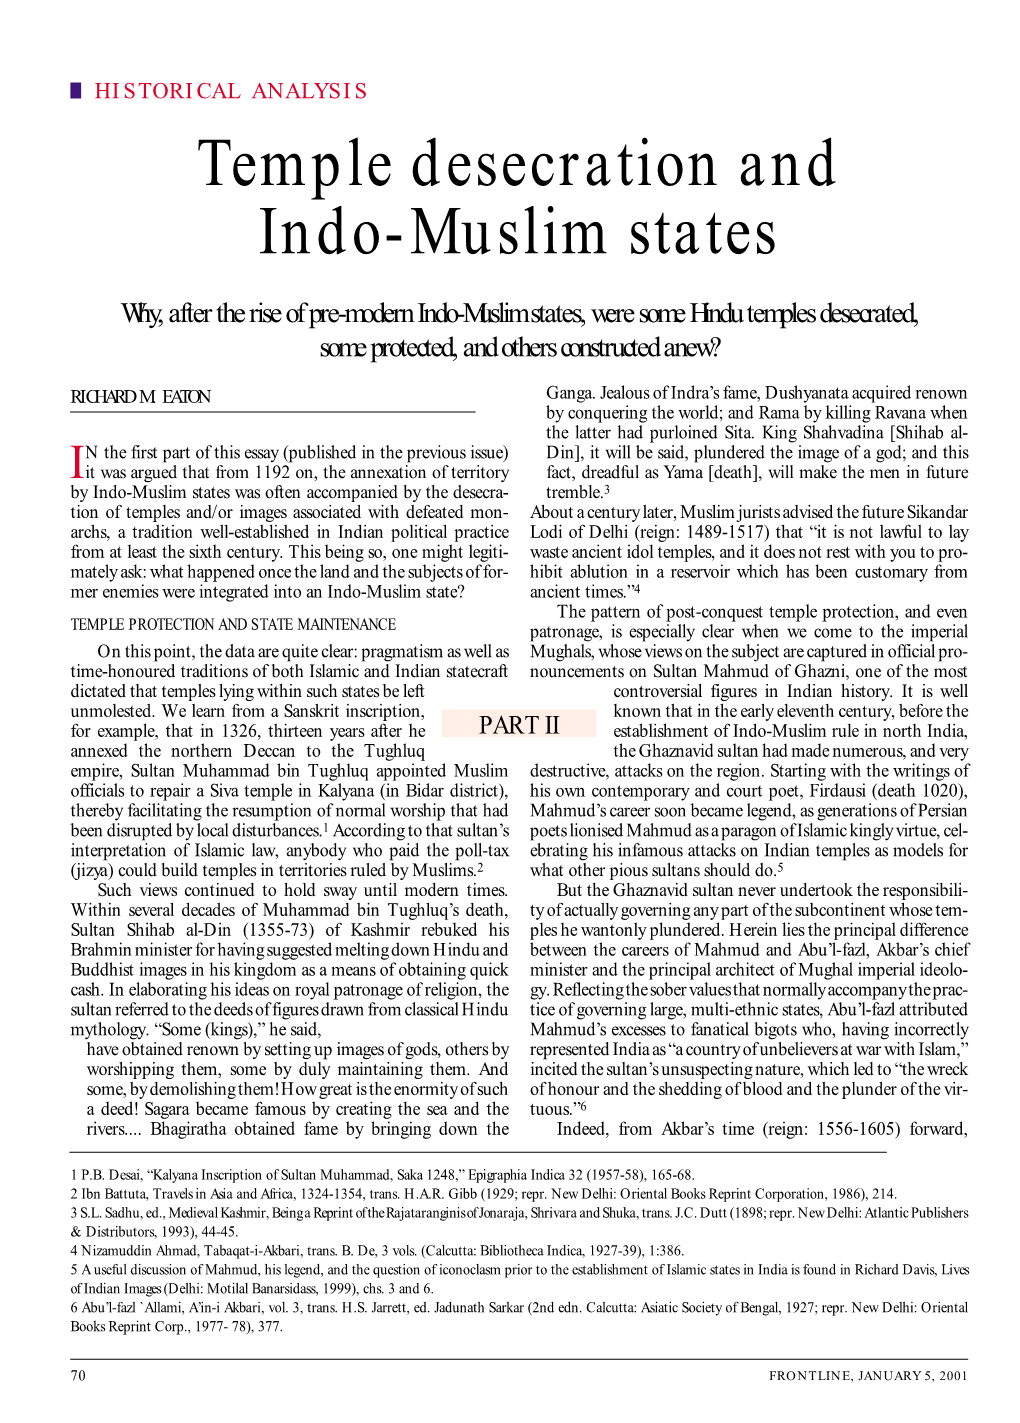 Temple Desecration and Indo-Muslim States